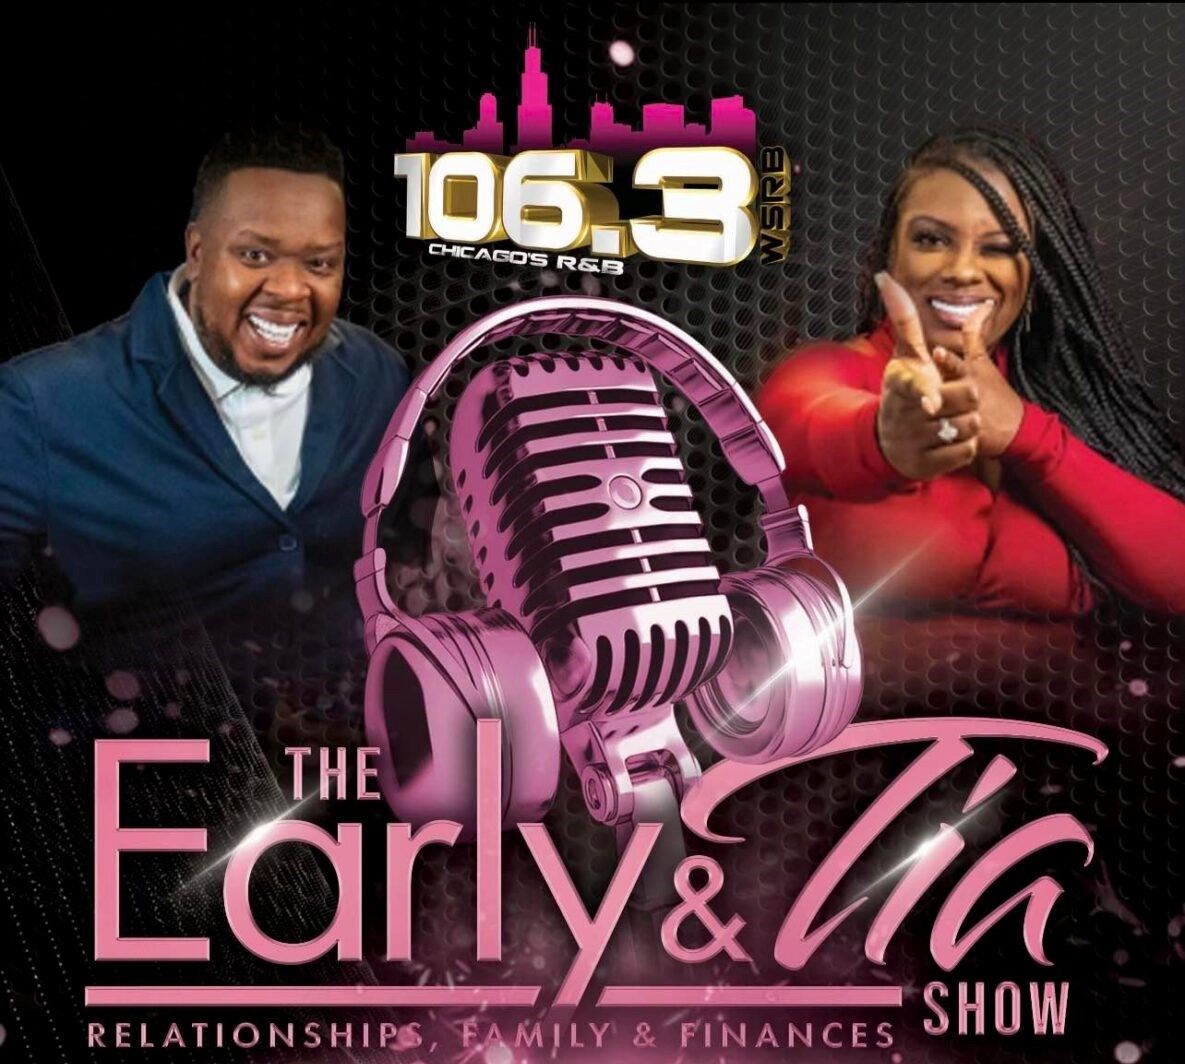 The Early & Tia Show